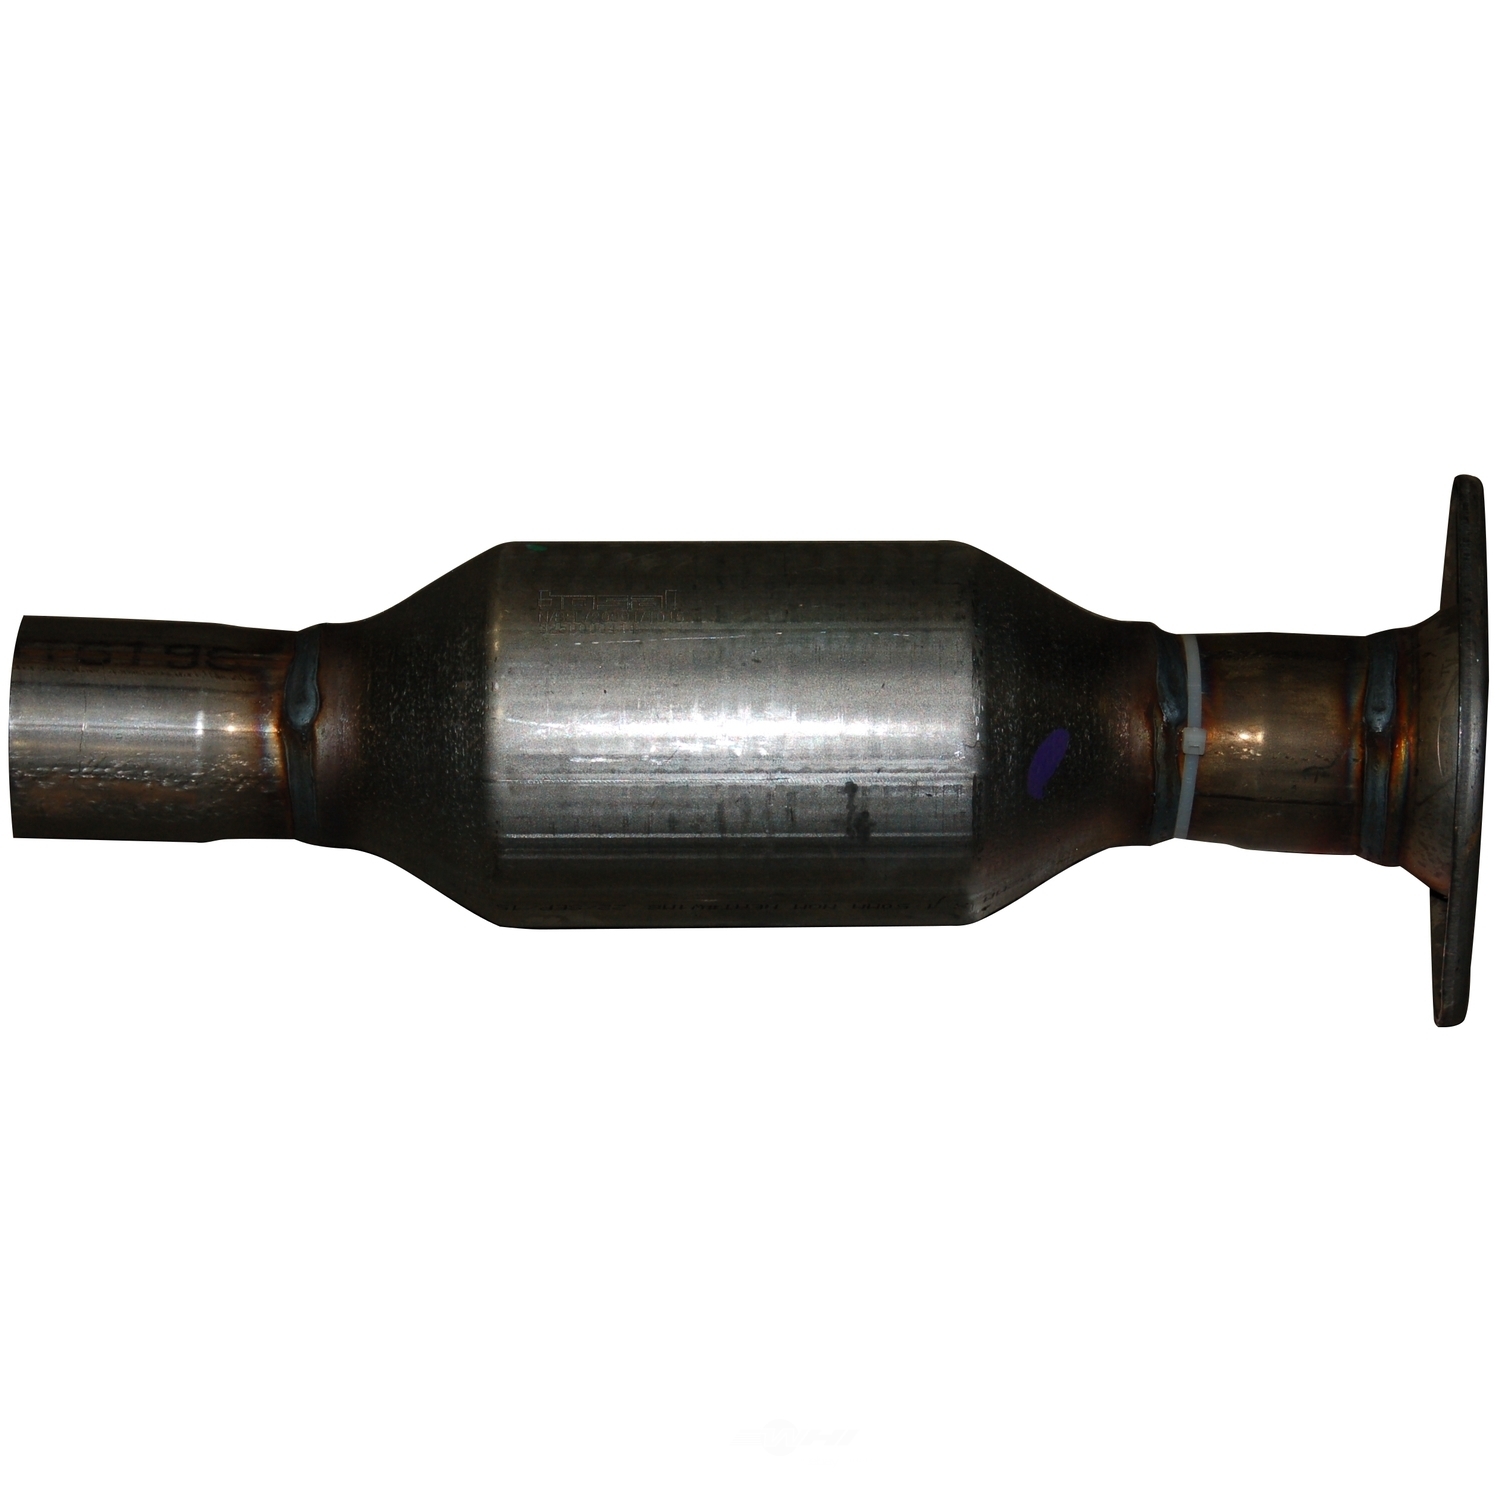 BREXHAUST 49 STATE CONVERTERS - BRExhaust Federal Direct-Fit Standard Load OBDII Catalytic Converter - BSF 099-1665